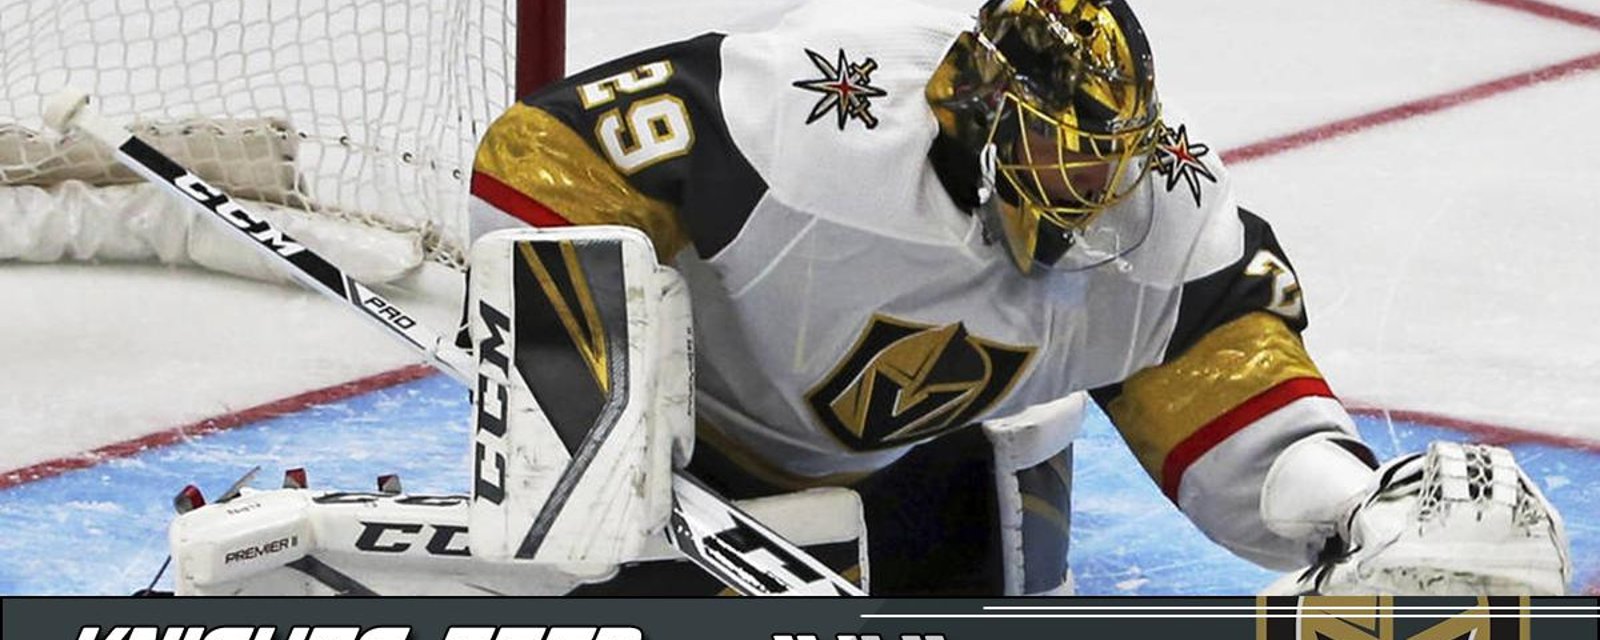 Report: Concerning statement from Knights coach on Fleury's status